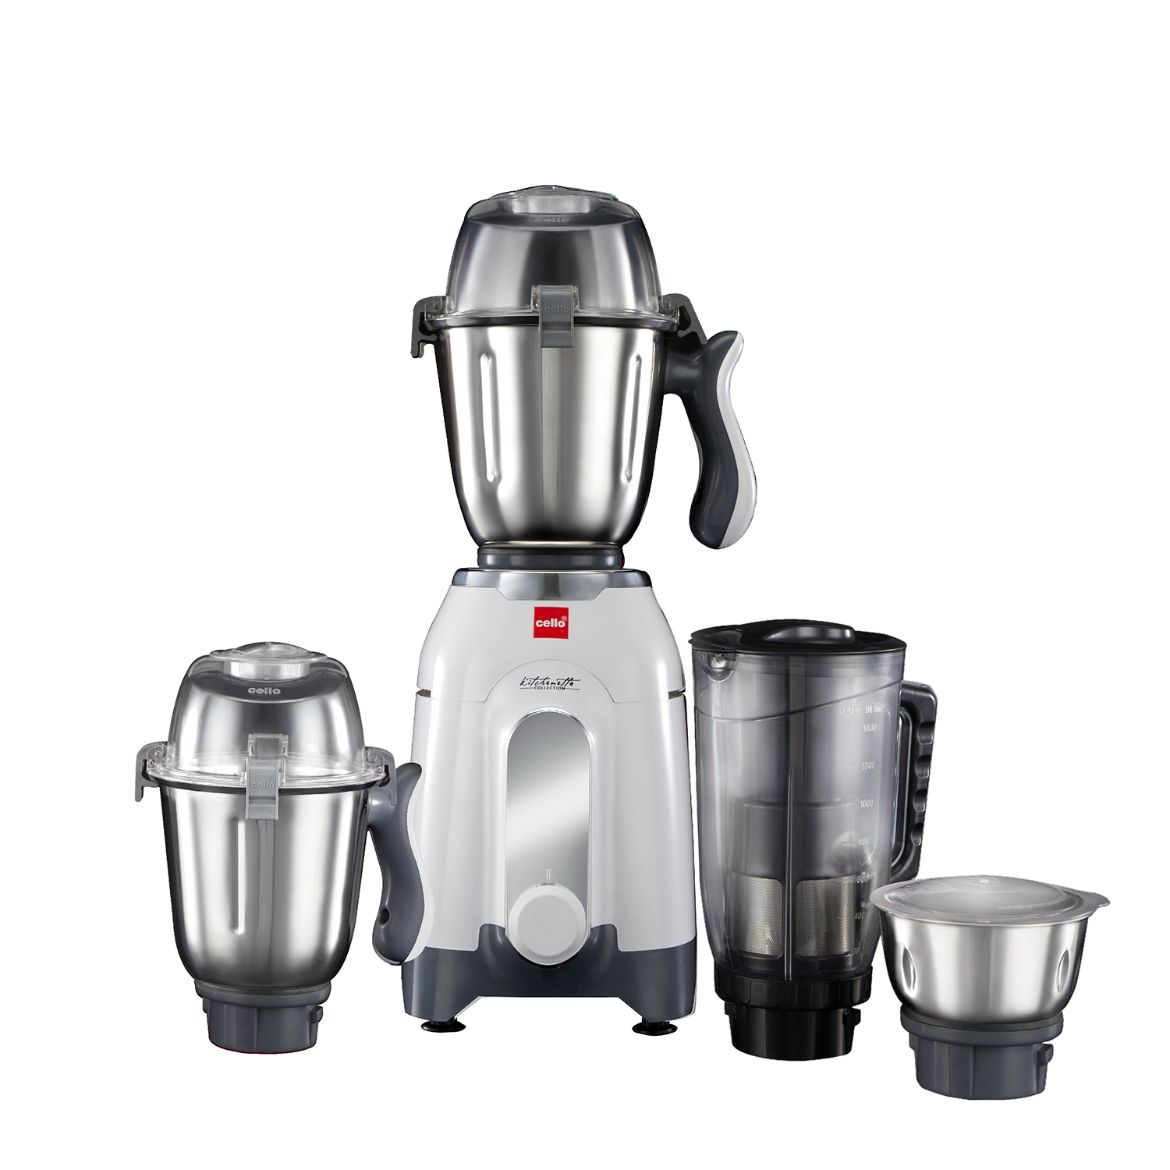 Discovery Pro Juicer Mixer Grinder with 4 Jars, 750W White / 750 Watts